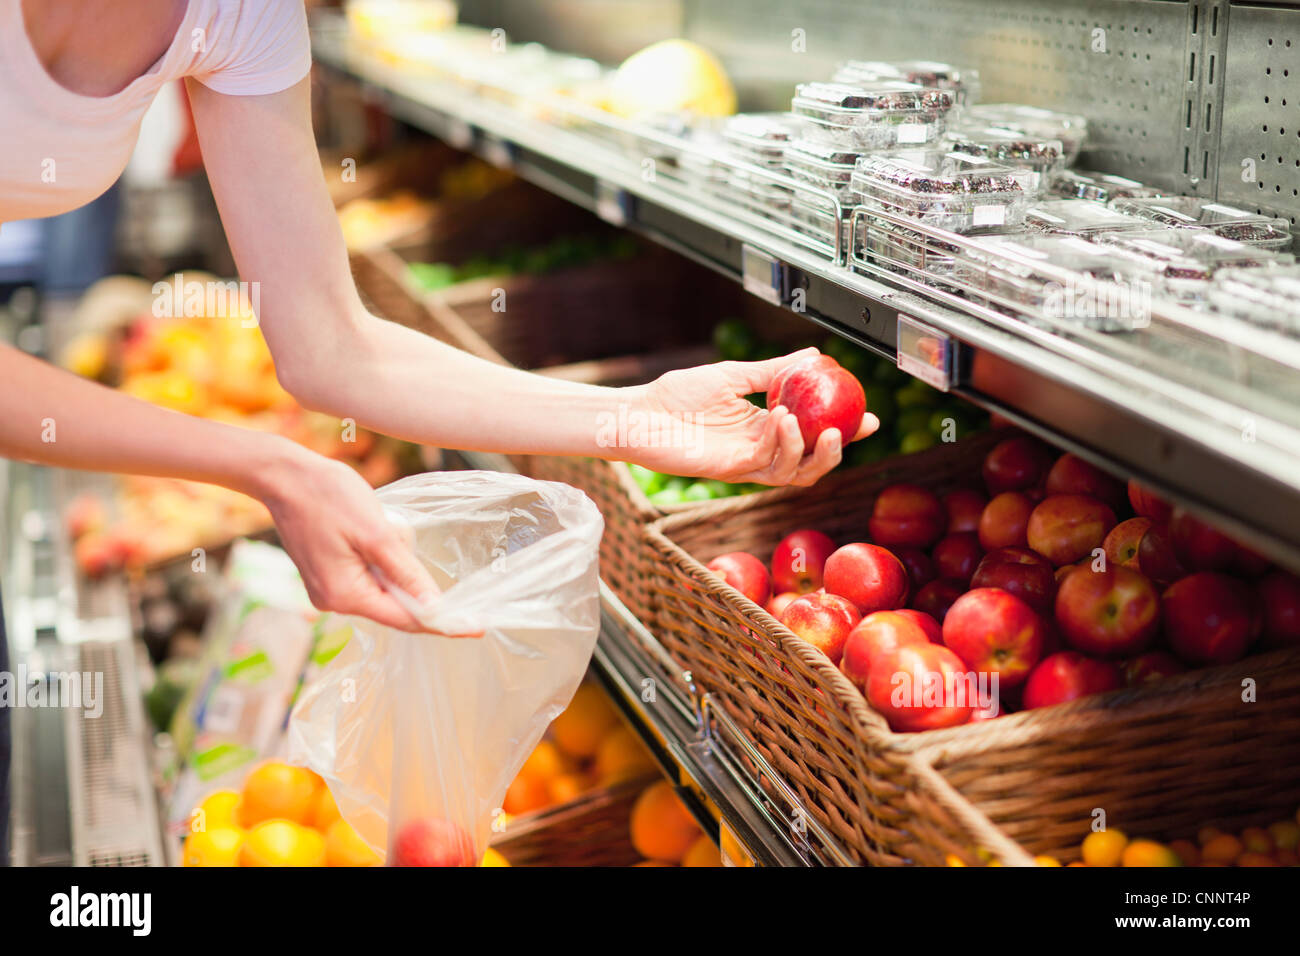 Woman selecting fruit at grocery store Stock Photo